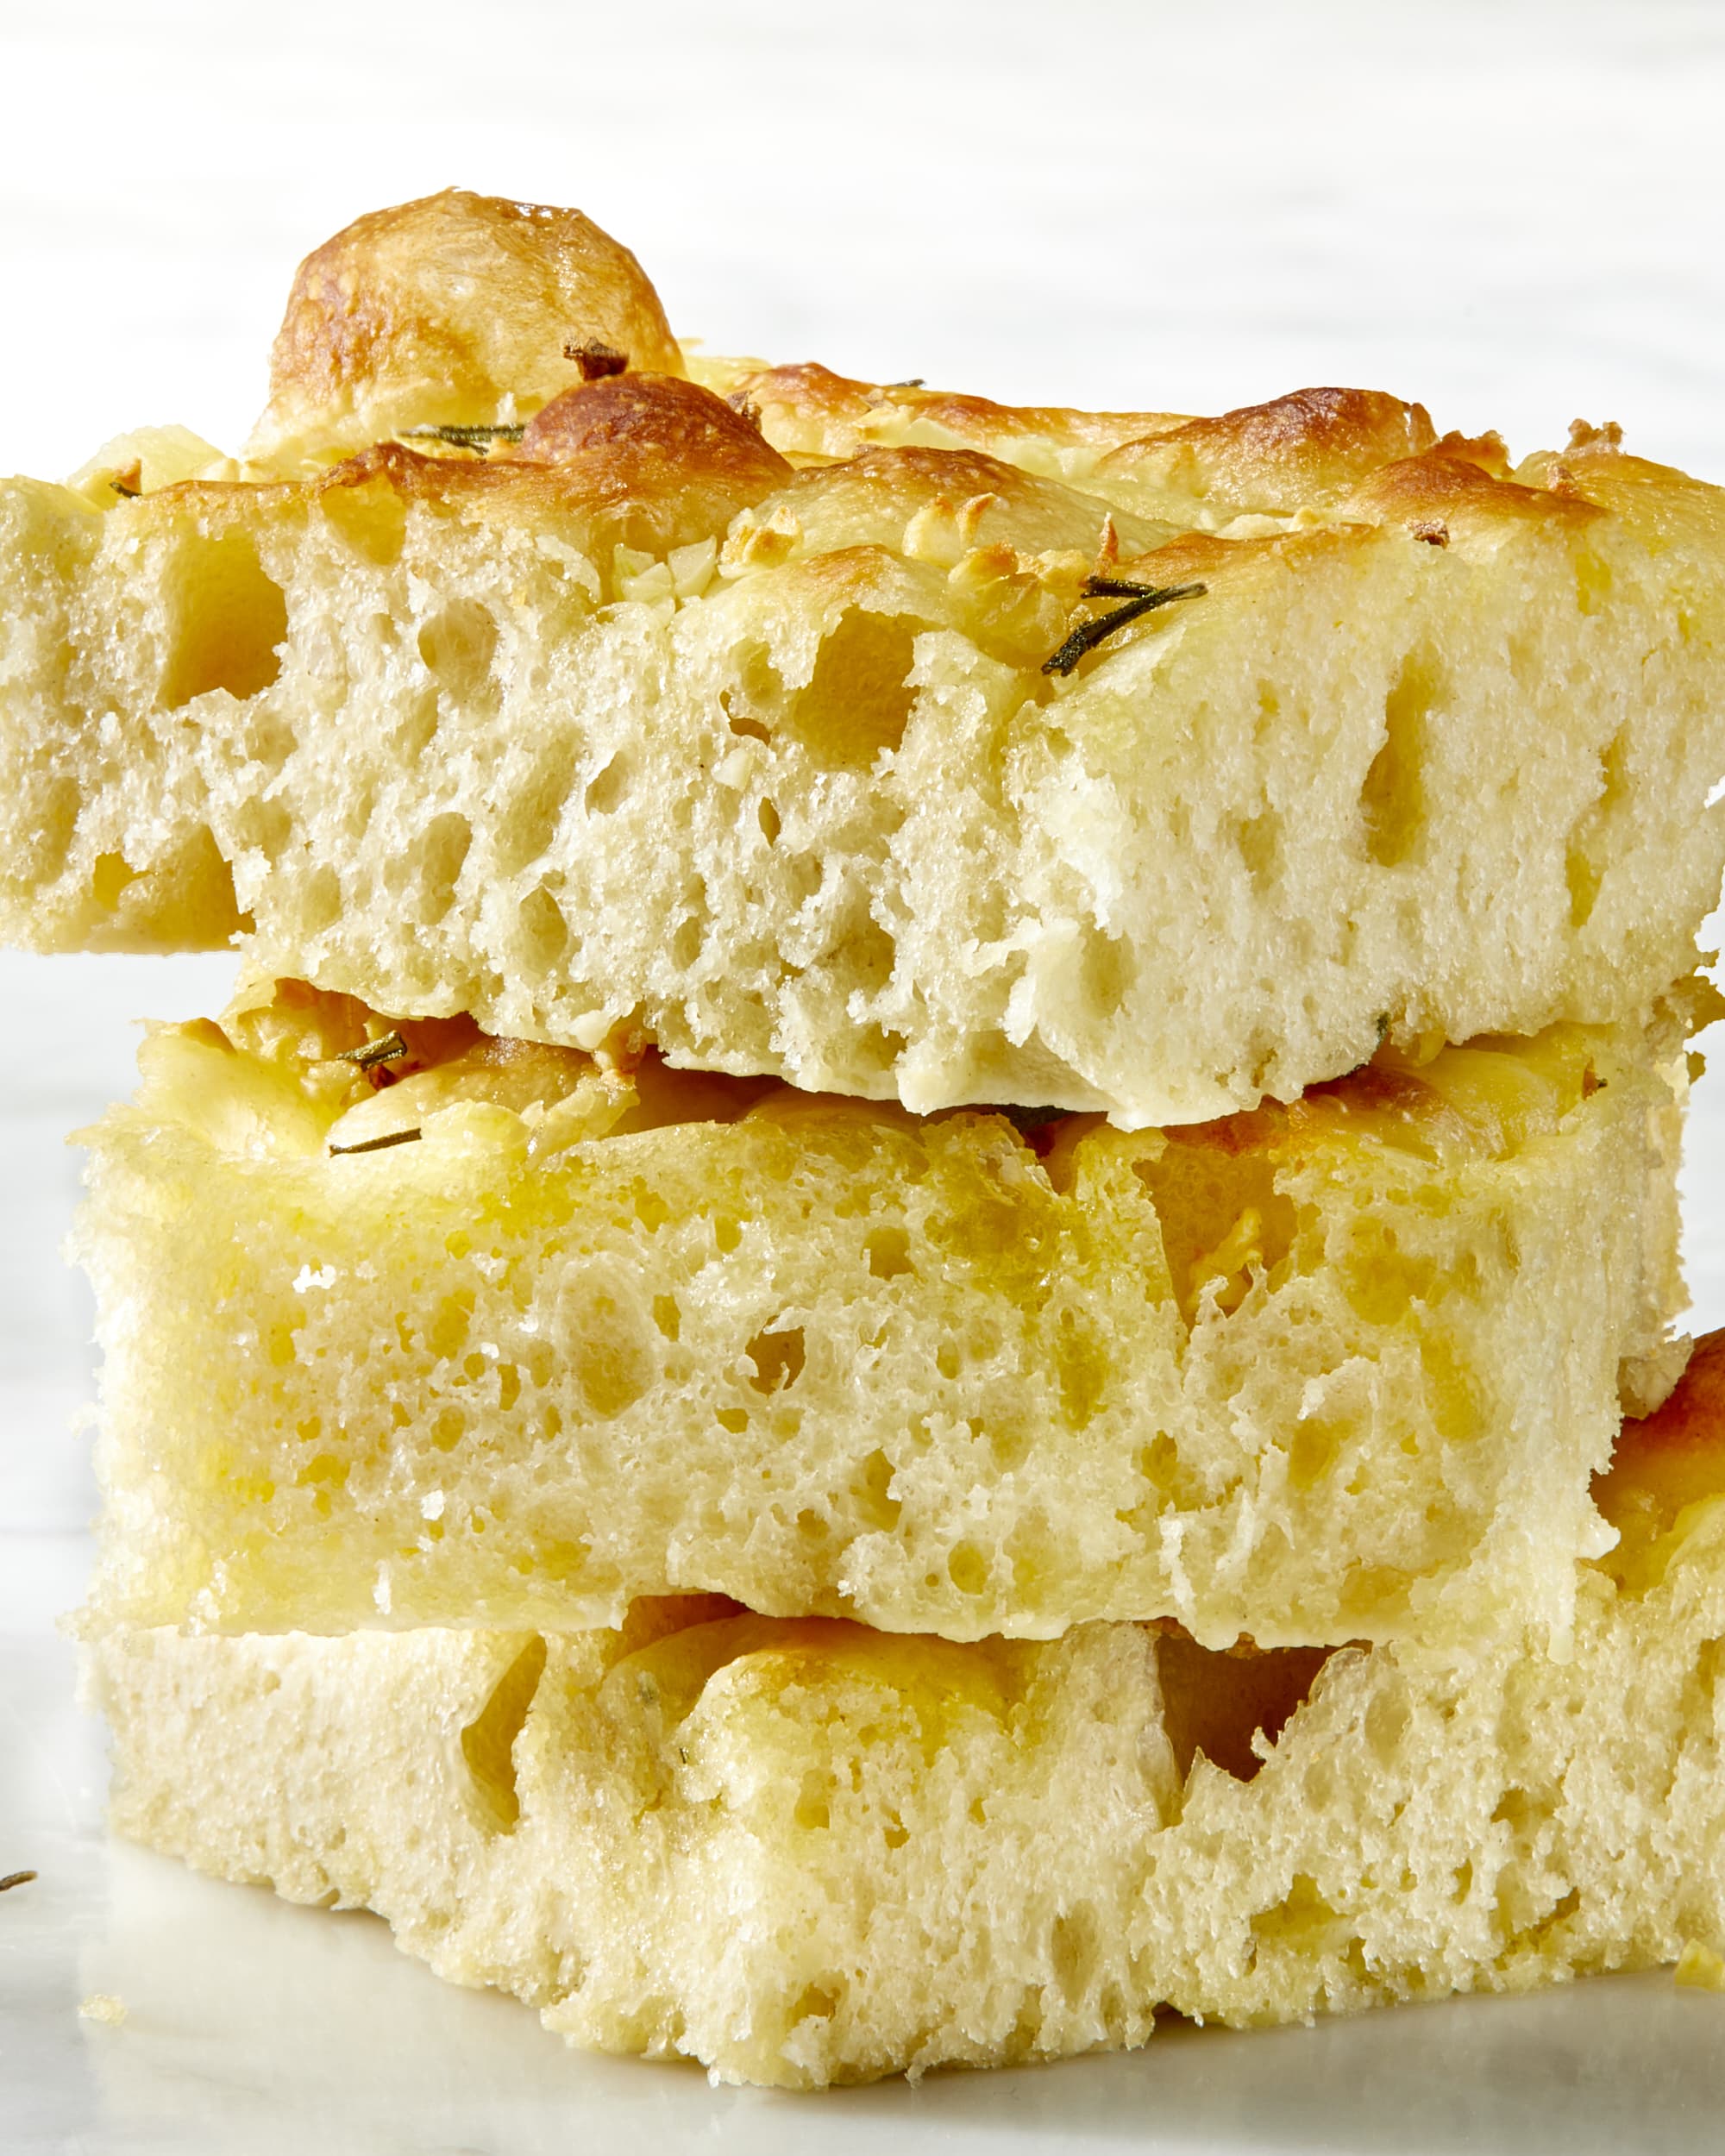 Rosemary Focaccia Bread Recipe – If You Give a Blonde a Kitchen